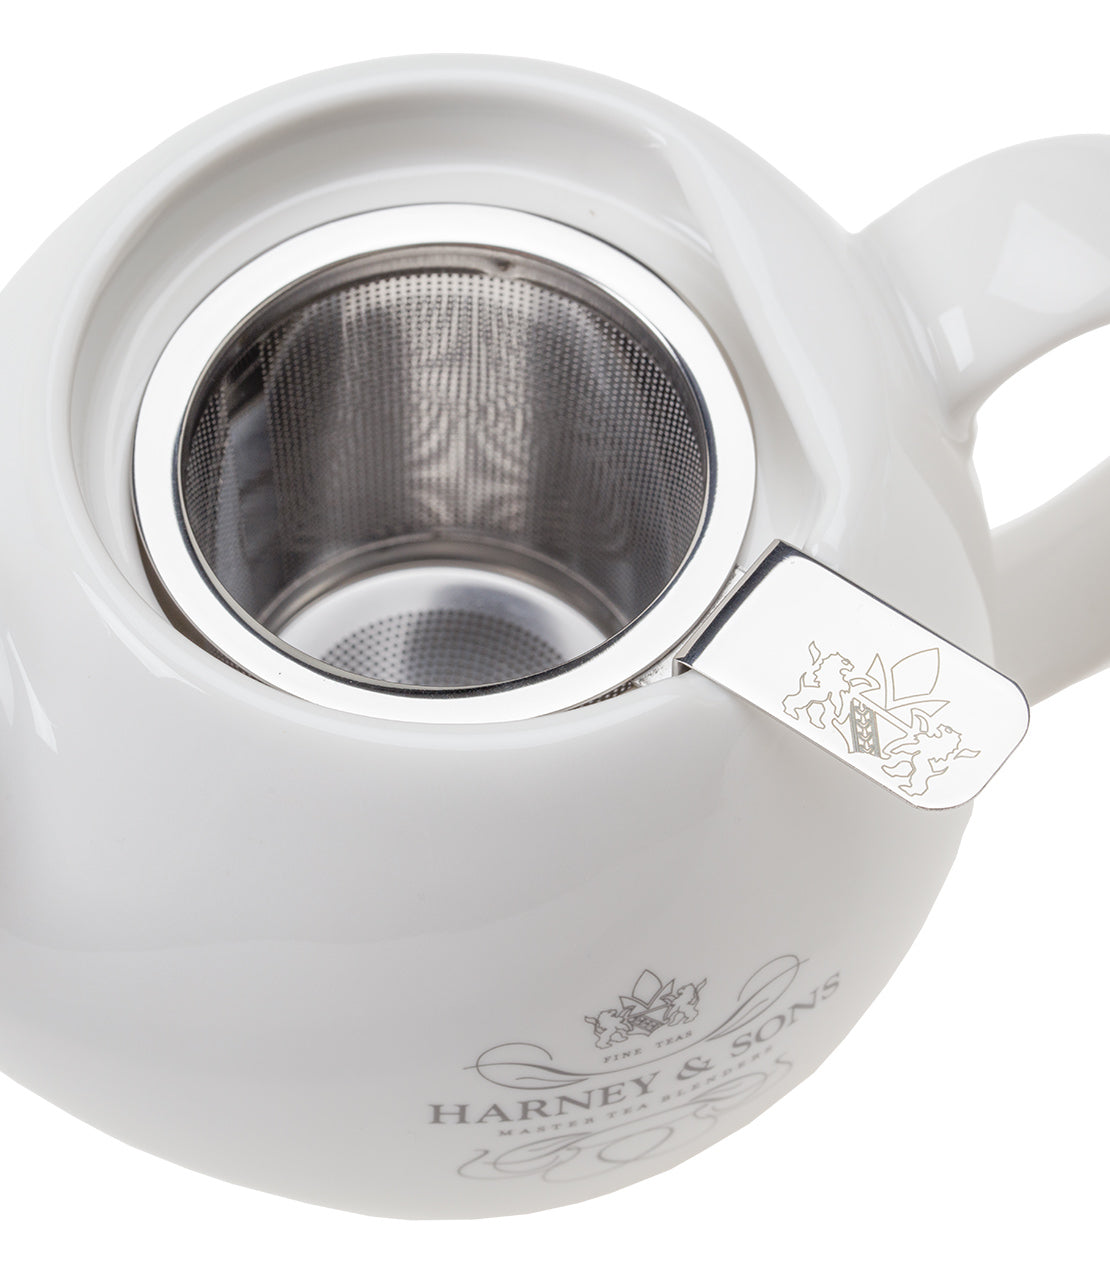 Harney & Sons Teapot with Infuser - 15 oz - Harney & Sons Fine Teas